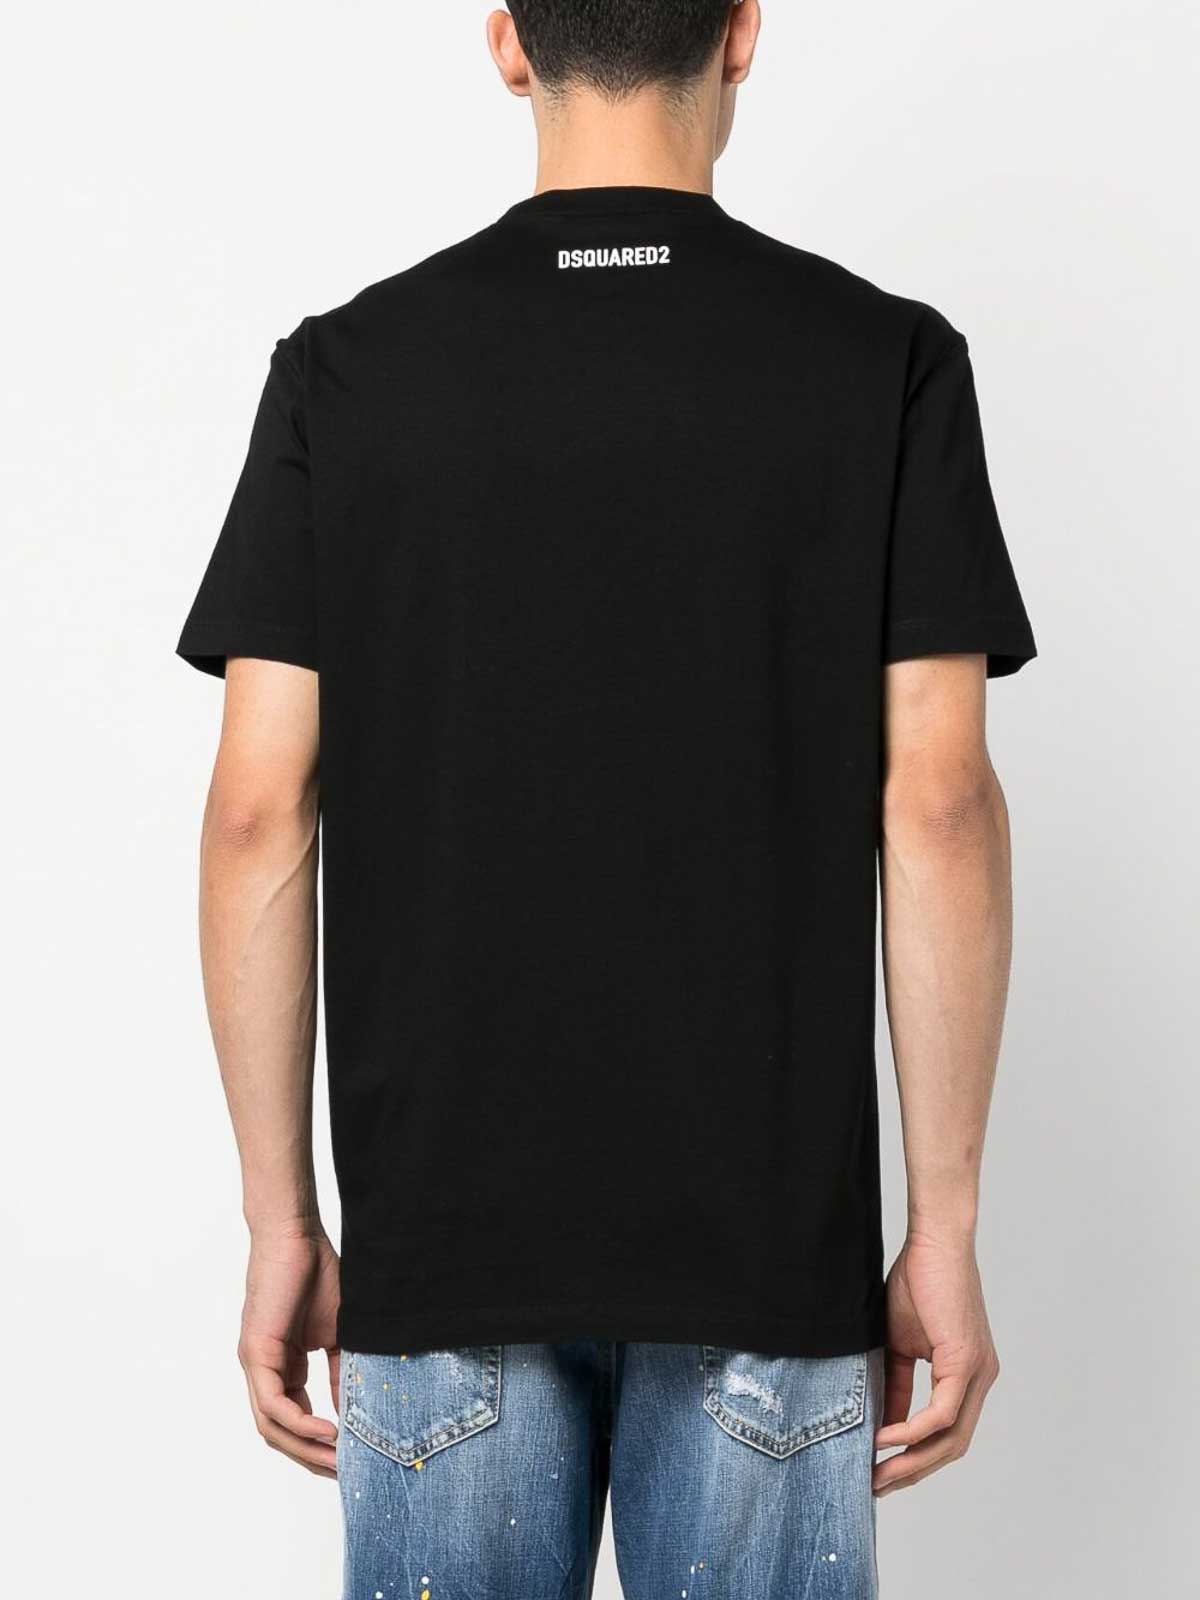 T-shirts Dsquared2 - Ciro cool fit tee - S79GC0073S23009900